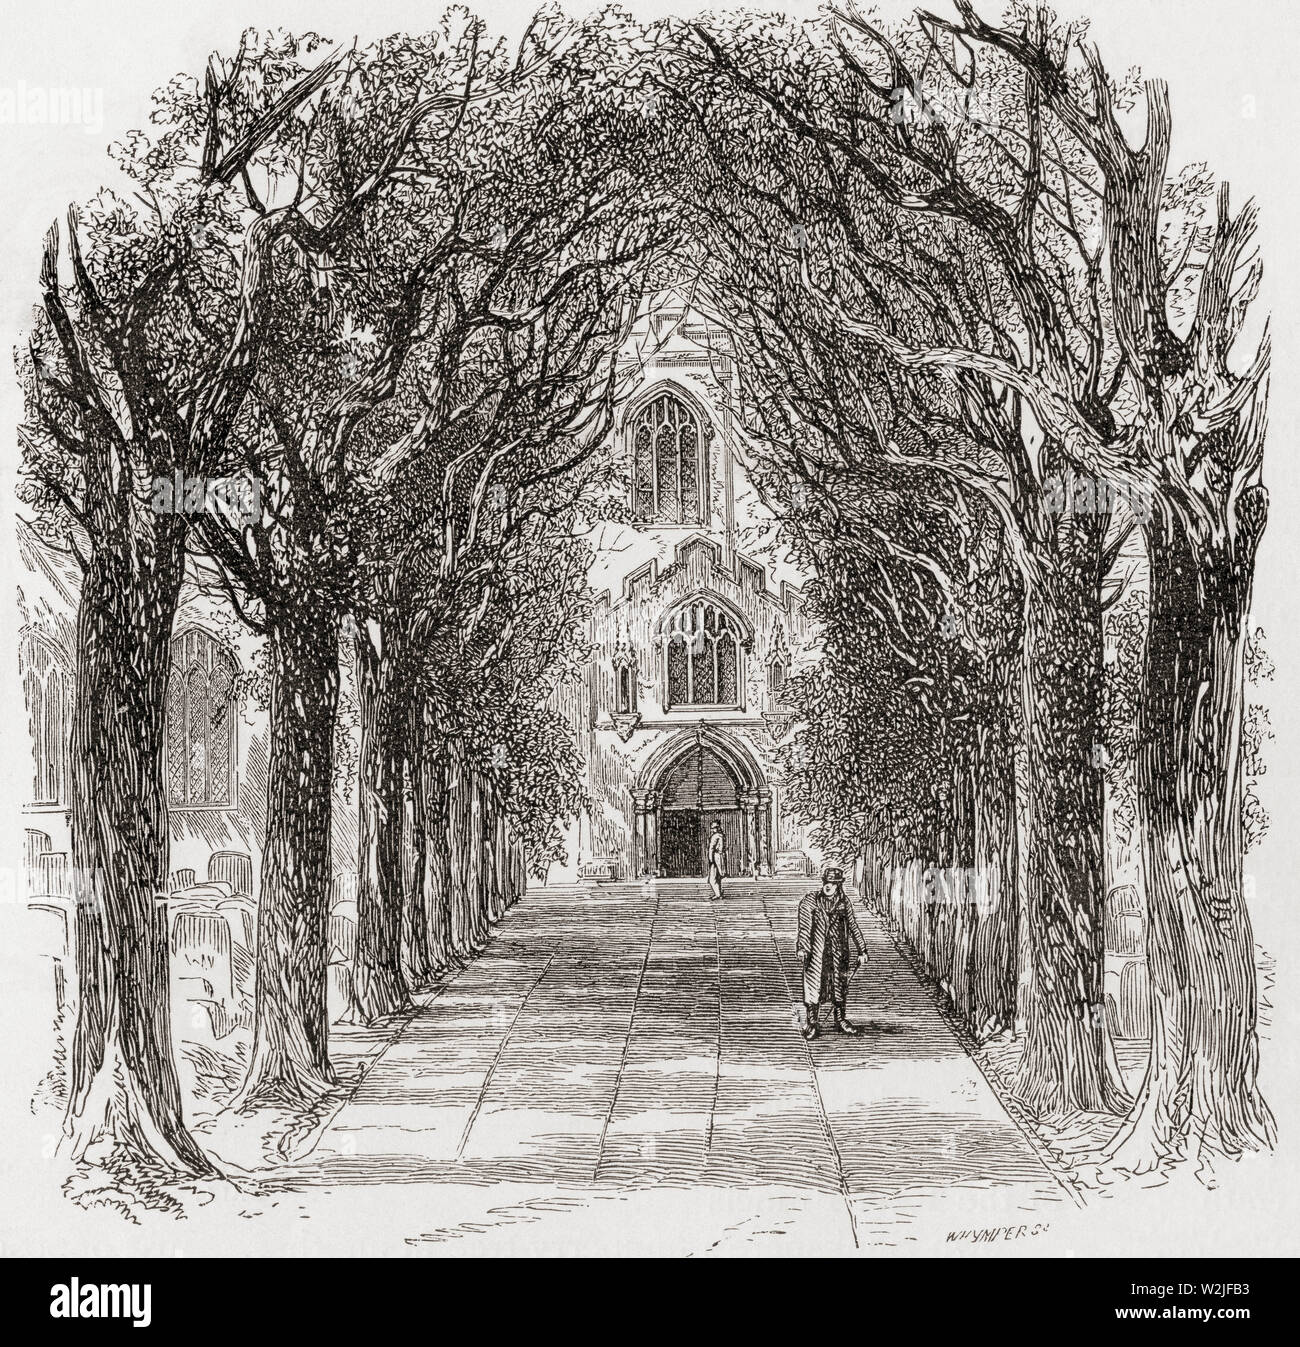 The Collegiate Church of the Holy and Undivided Trinity, Stratford-upon-Avon, England.  The avenue leading to the door, seen here in the 19th century.  This church was the place of baptism and burial of William Shakespeare.  From English Pictures, published 1890. Stock Photo